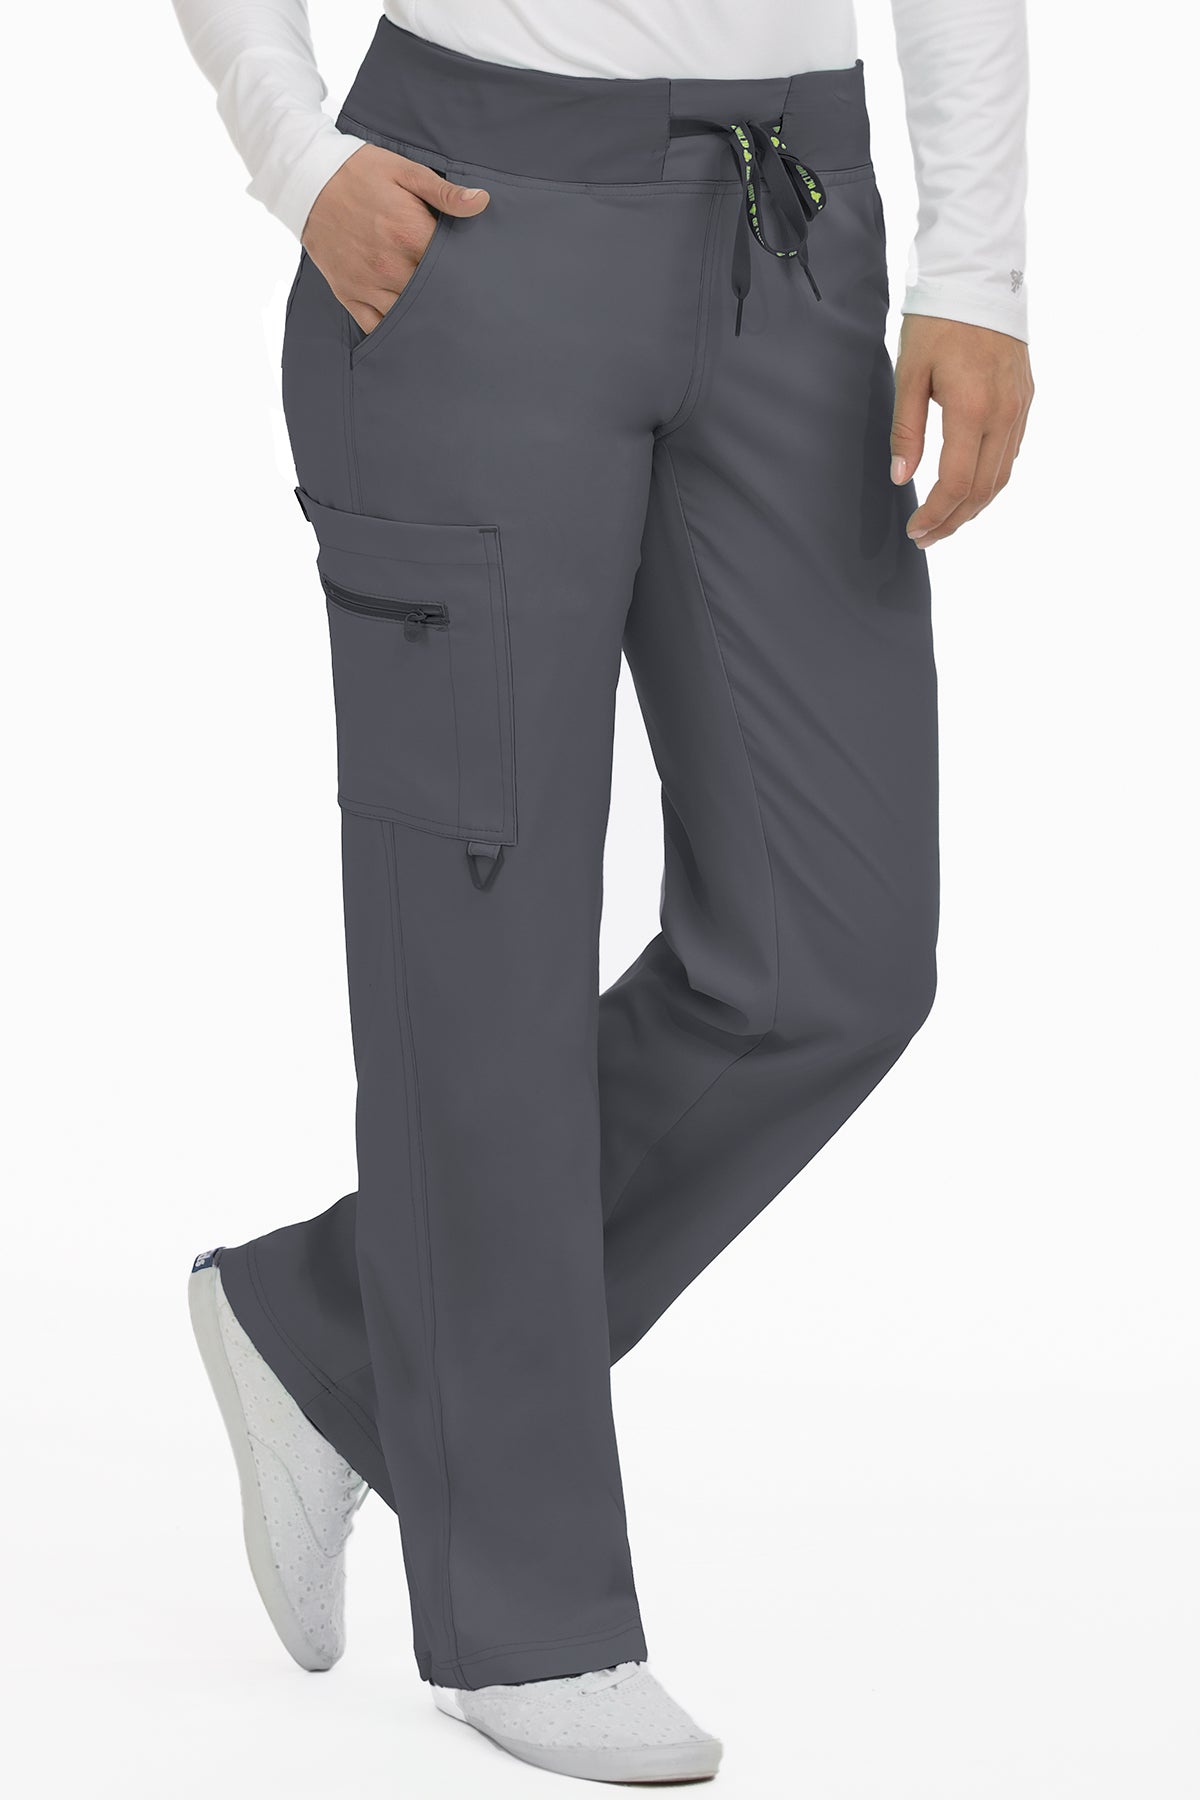 Yoga 1 Cargo Pocket Pants by Med Couture (Regular)  (XXS-3XL) / Pewter